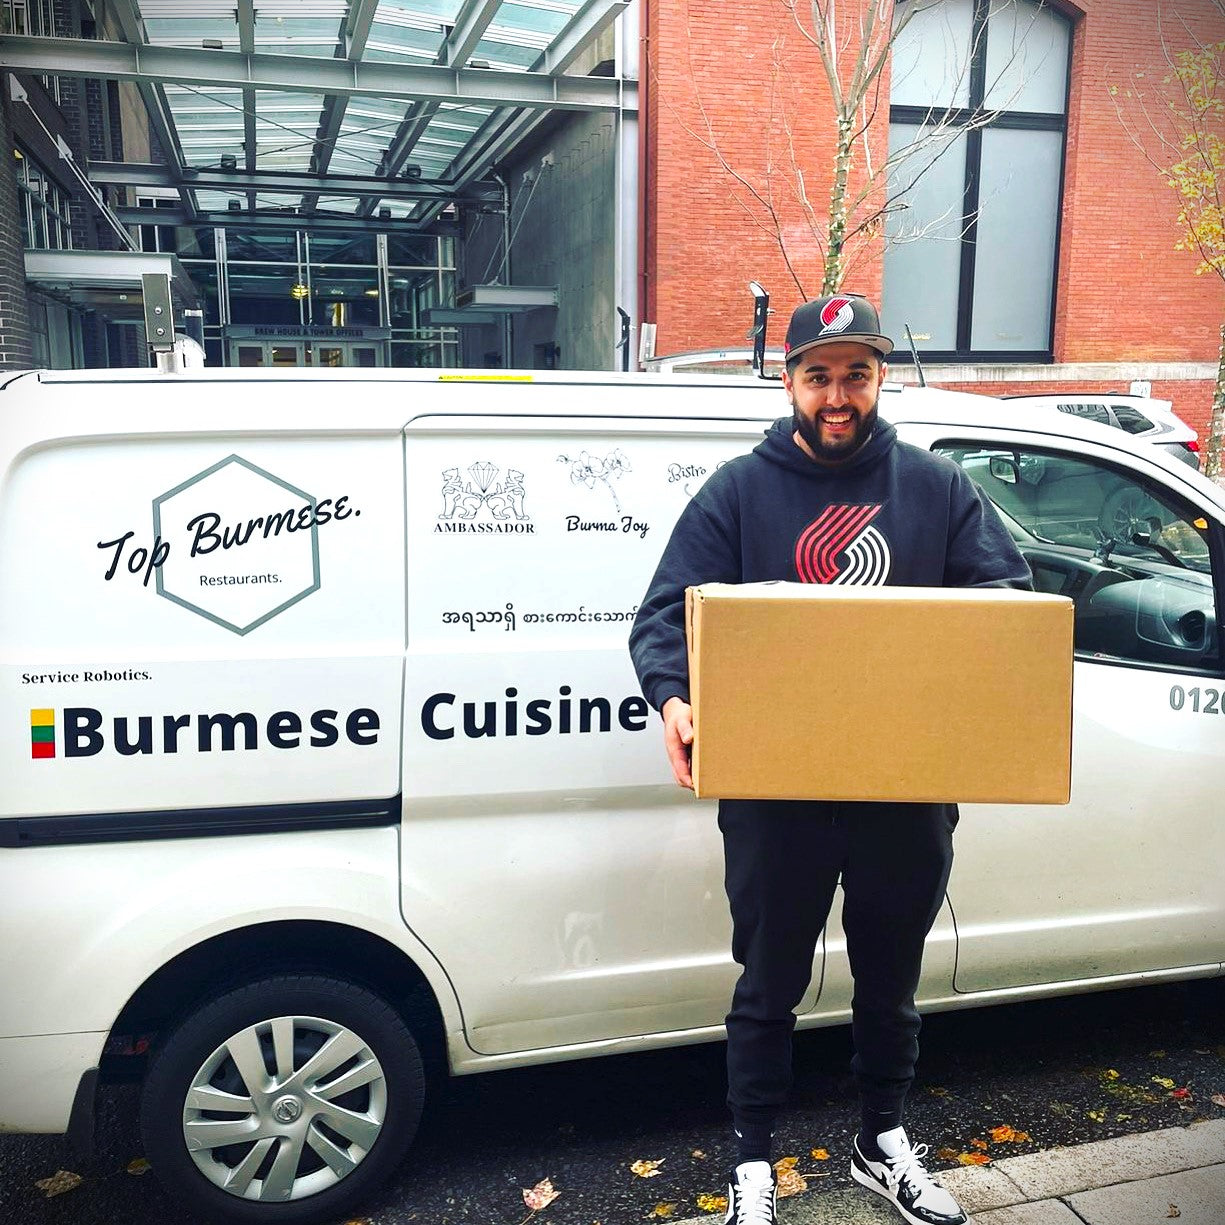 Top Burmese Catering. Free Local Deliveries.